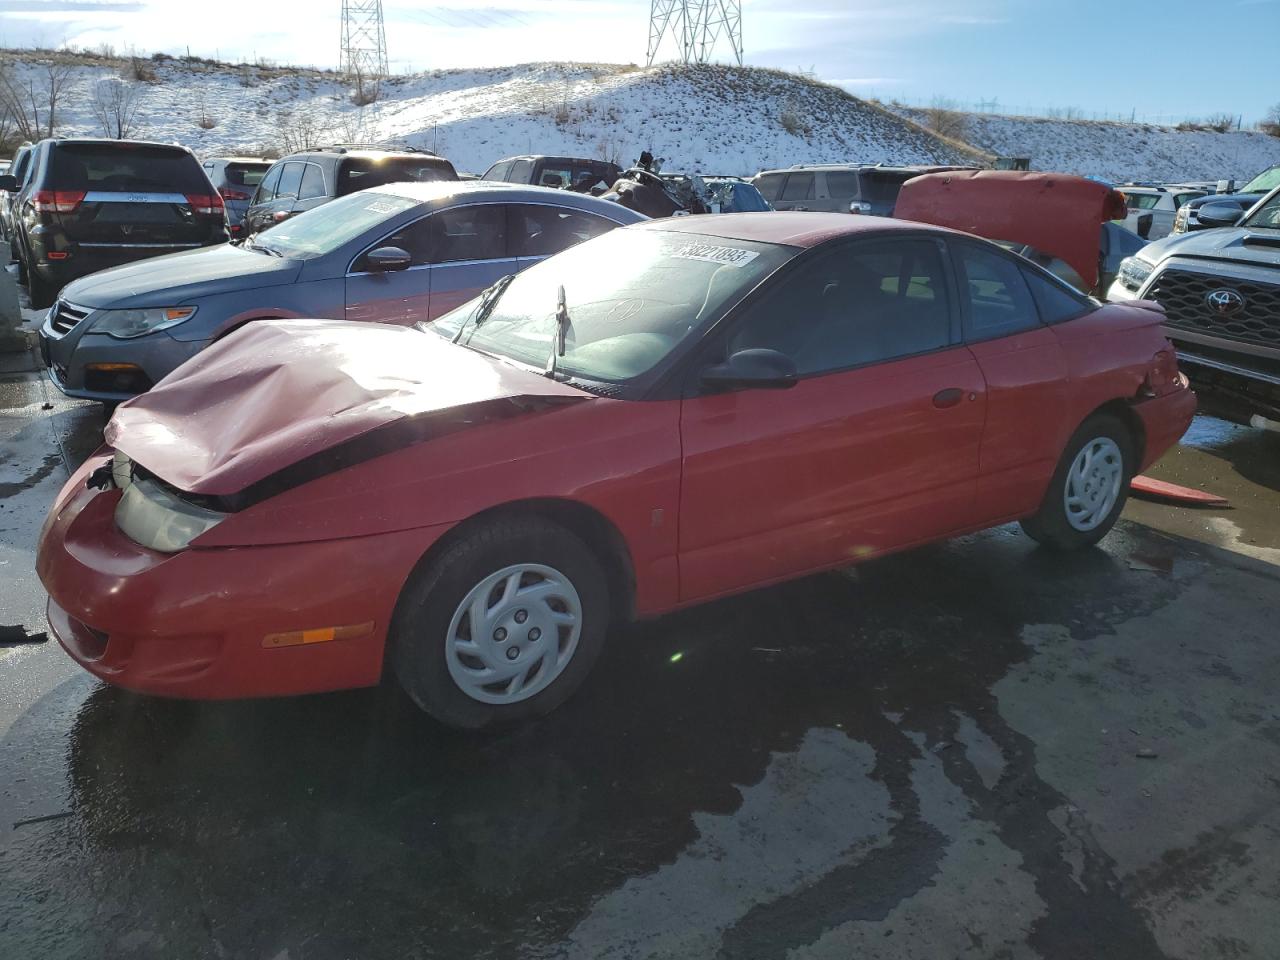 2000 Saturn SC1 for sale at Copart Littleton, CO Lot #38221*** |  SalvageReseller.com